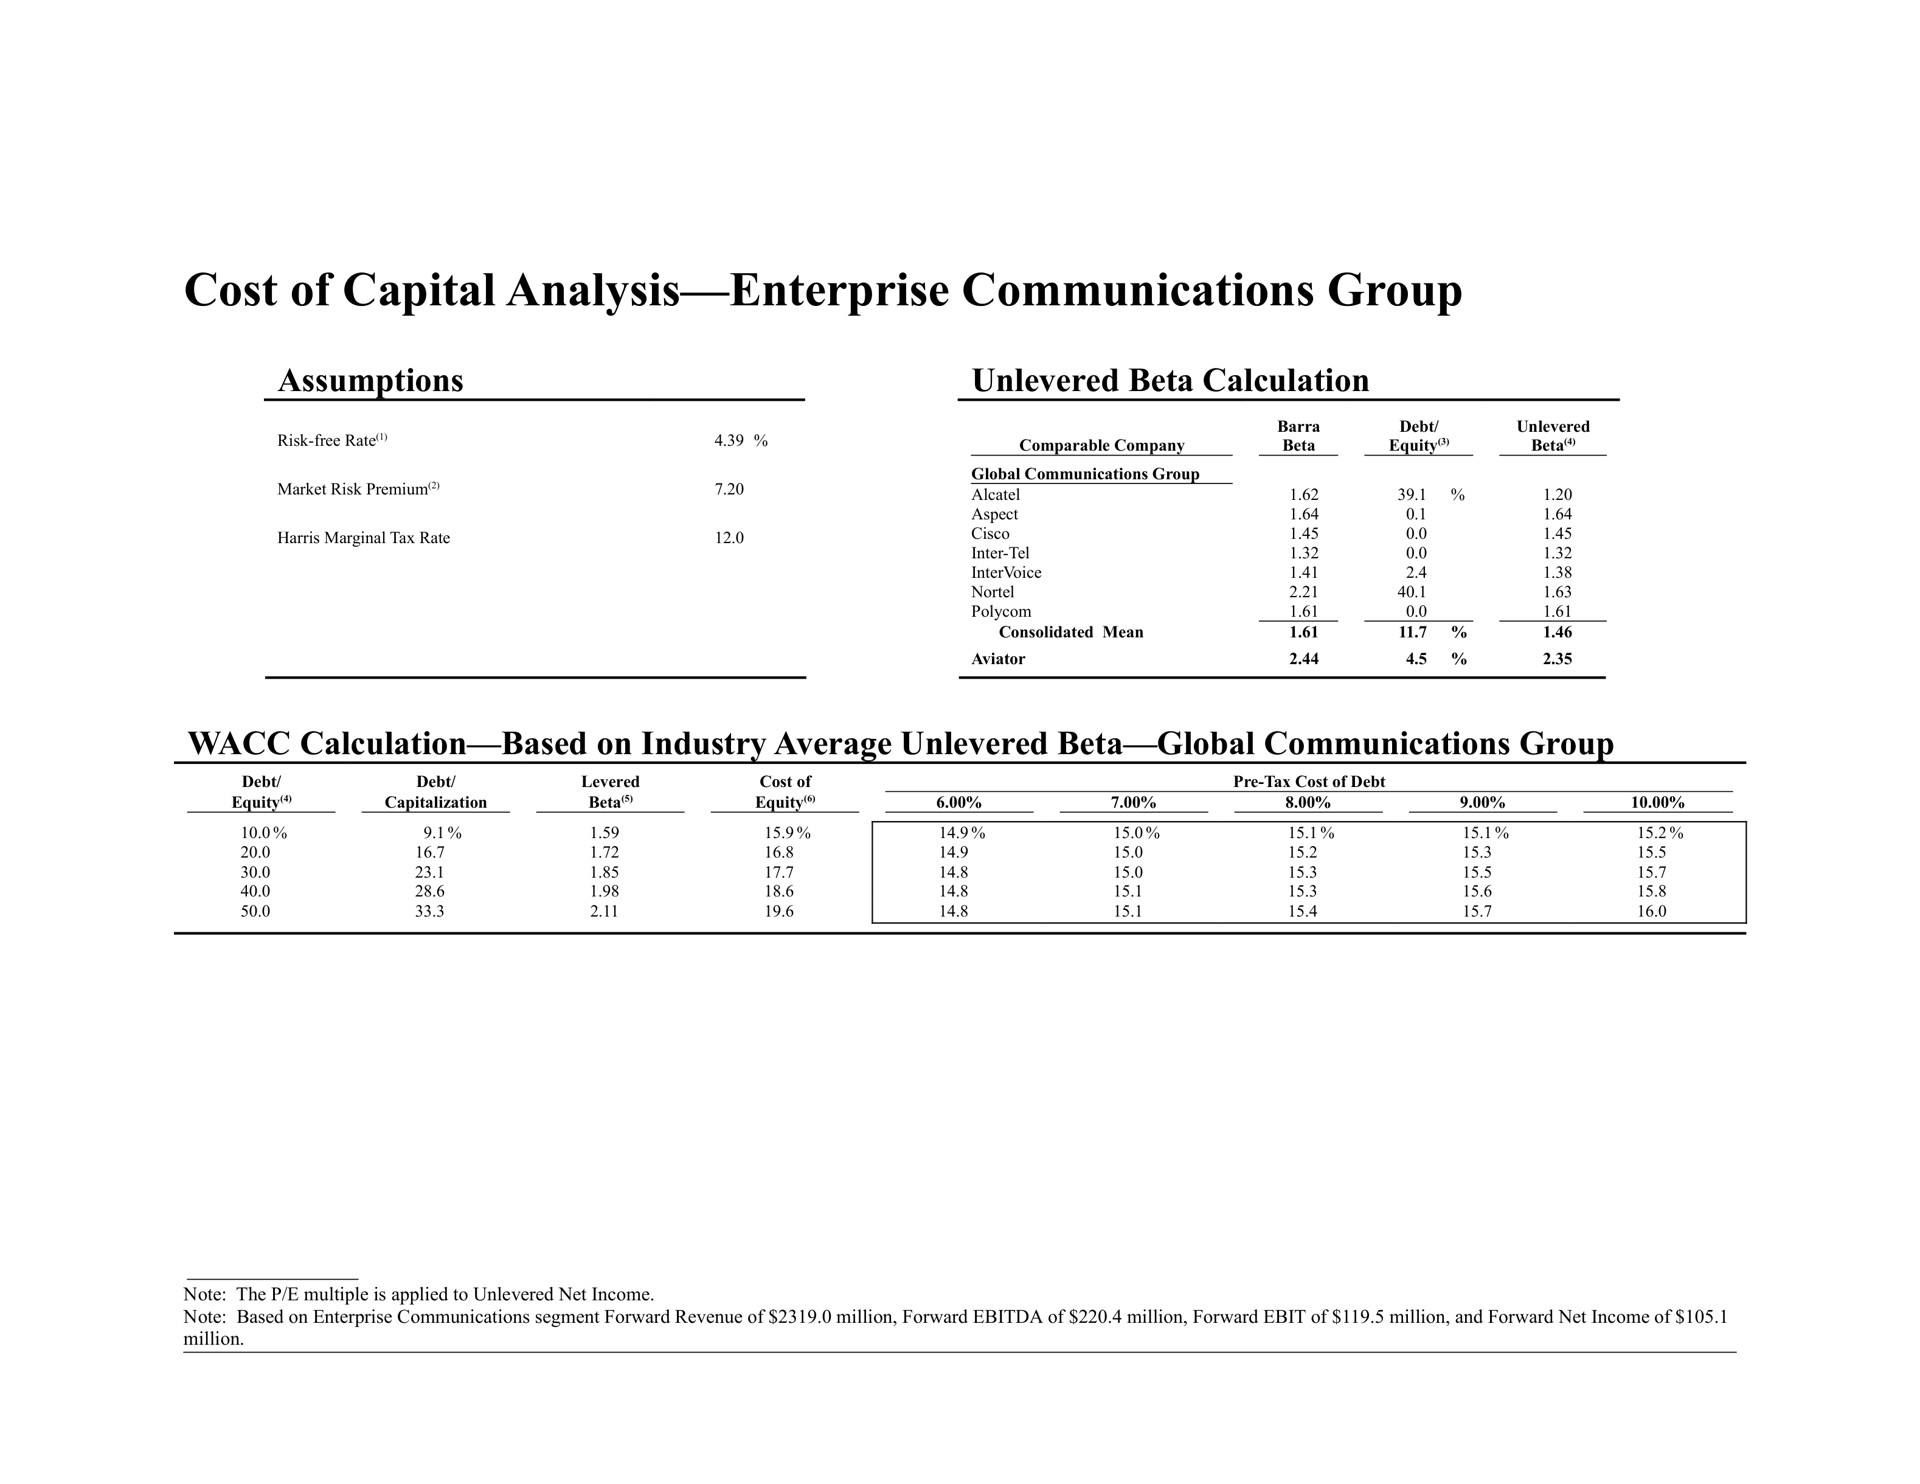 cost of capital analysis enterprise communications group assumptions beta calculation calculation based on industry average beta global communications group | Bear Stearns